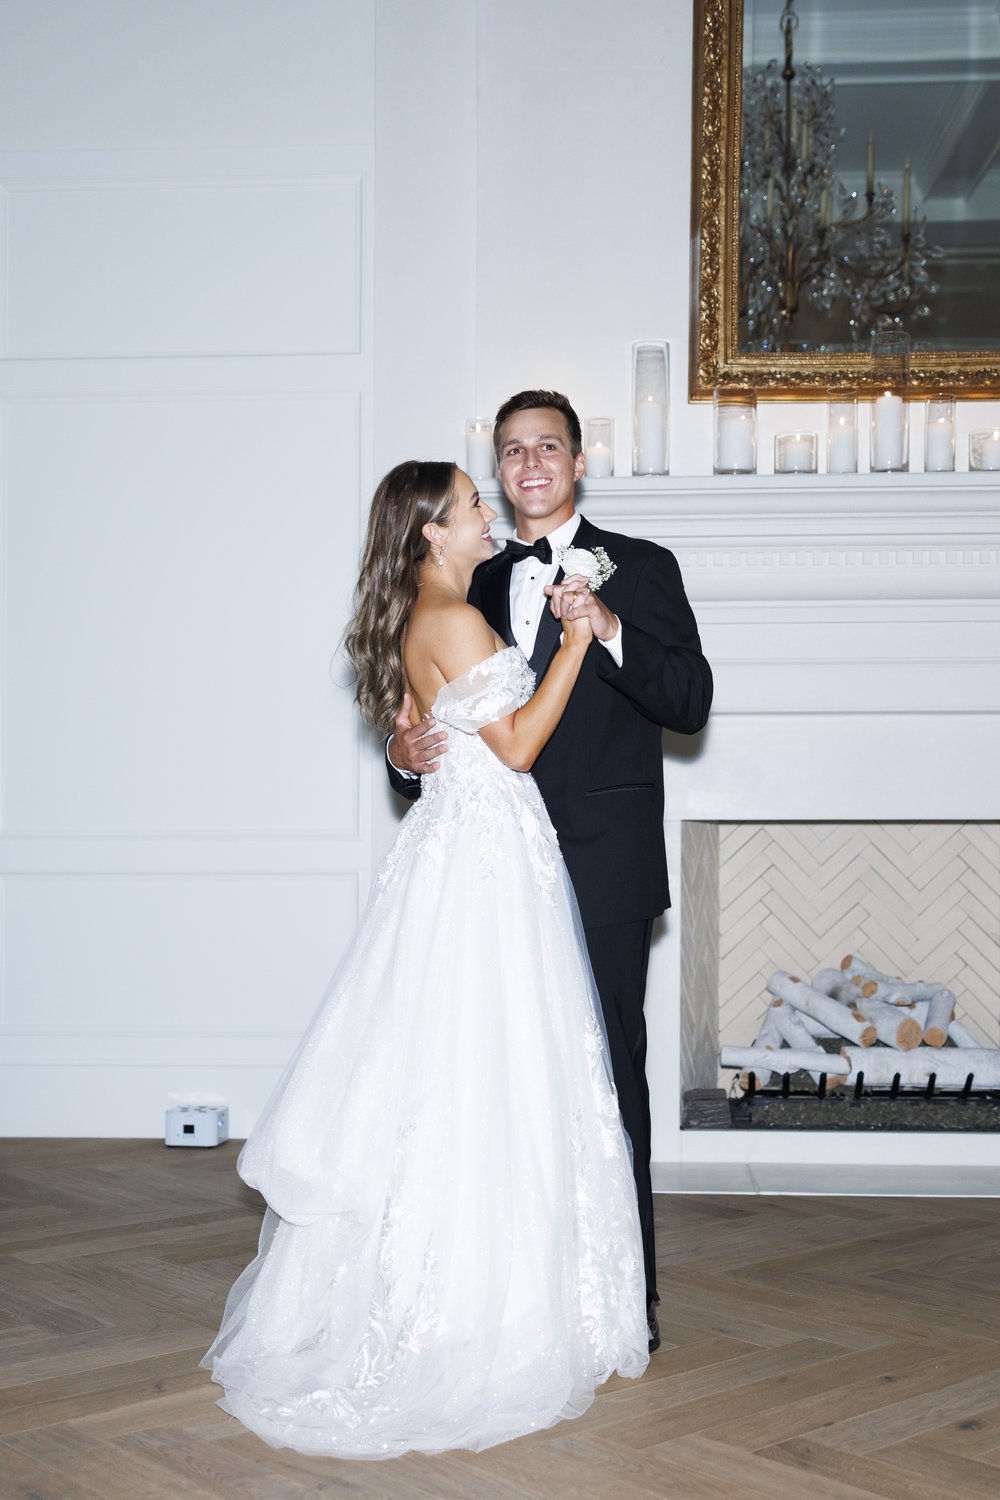  Savanna Richardson Photography gives step-by-step instructions on how to create flash photography at reception. trendy wedding #SavannaRichardsonPhotography #SavannaRichardsonTips #WeddingTips #PhotographyTips #weddingrecepiton #flashphotography 